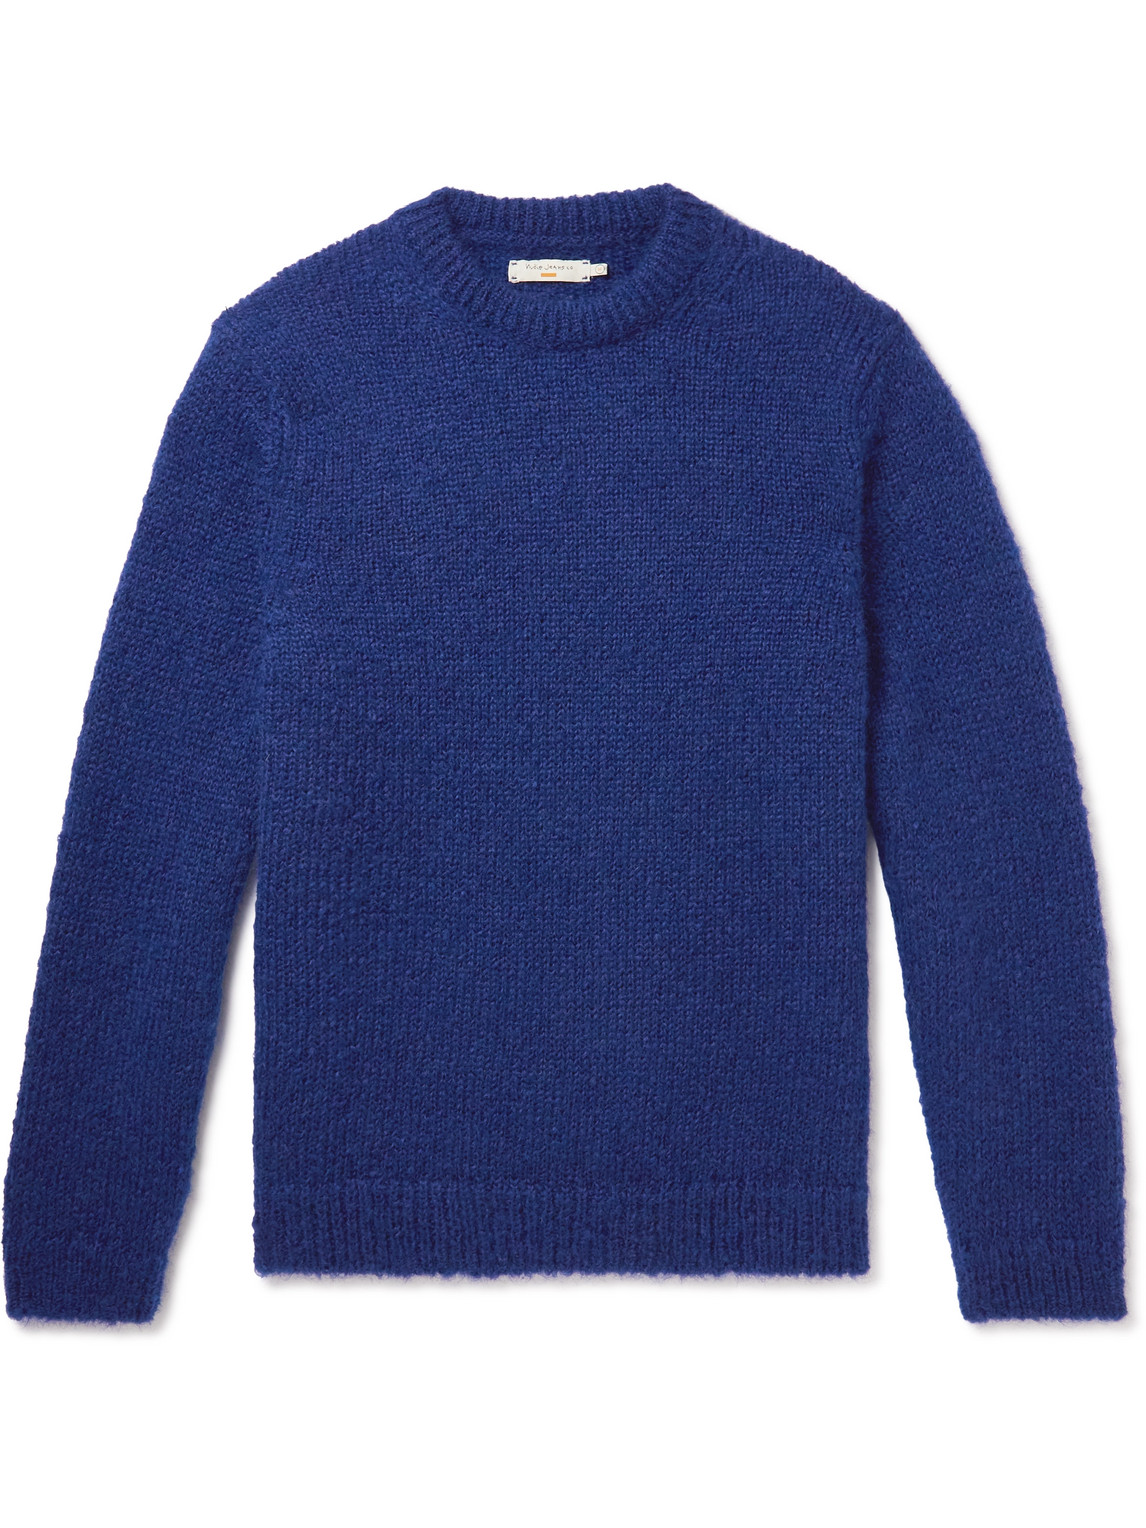 NUDIE JEANS AUGUST MOHAIR SWEATER